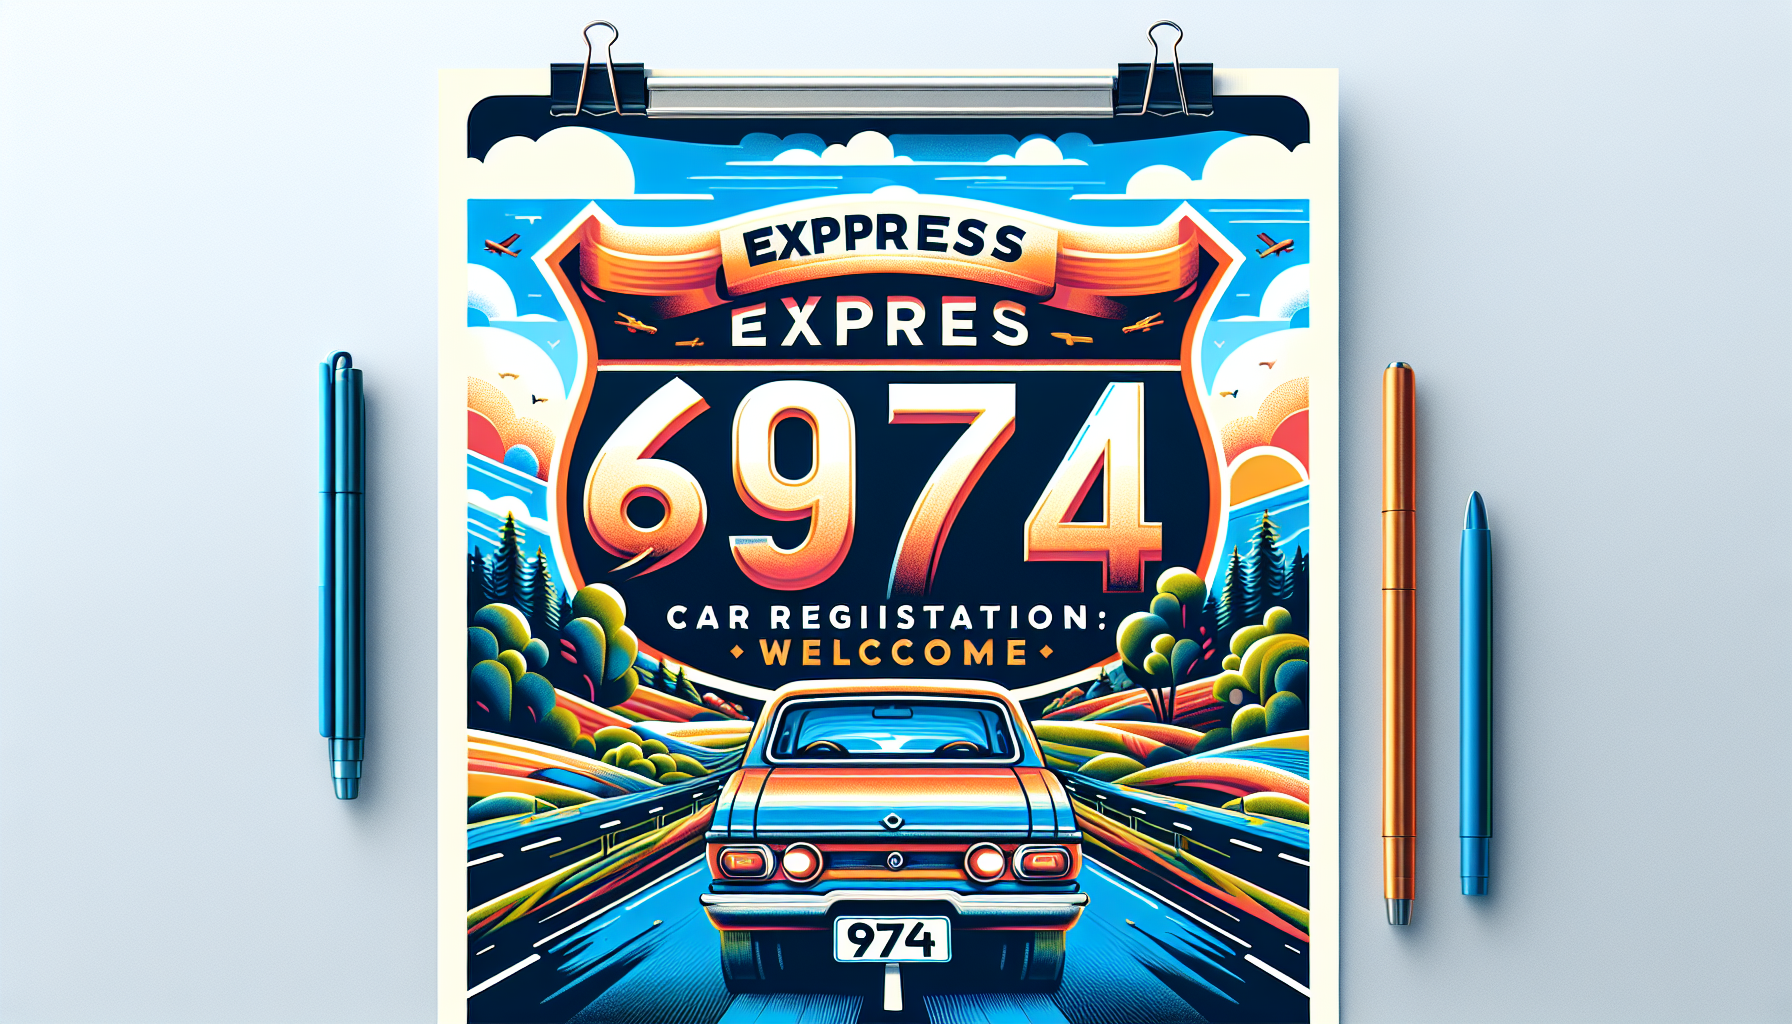 get your vehicle registration done in reunion island quickly with carte grise express 974. visit us for a smooth and efficient process. welcome to carte grise express 974!